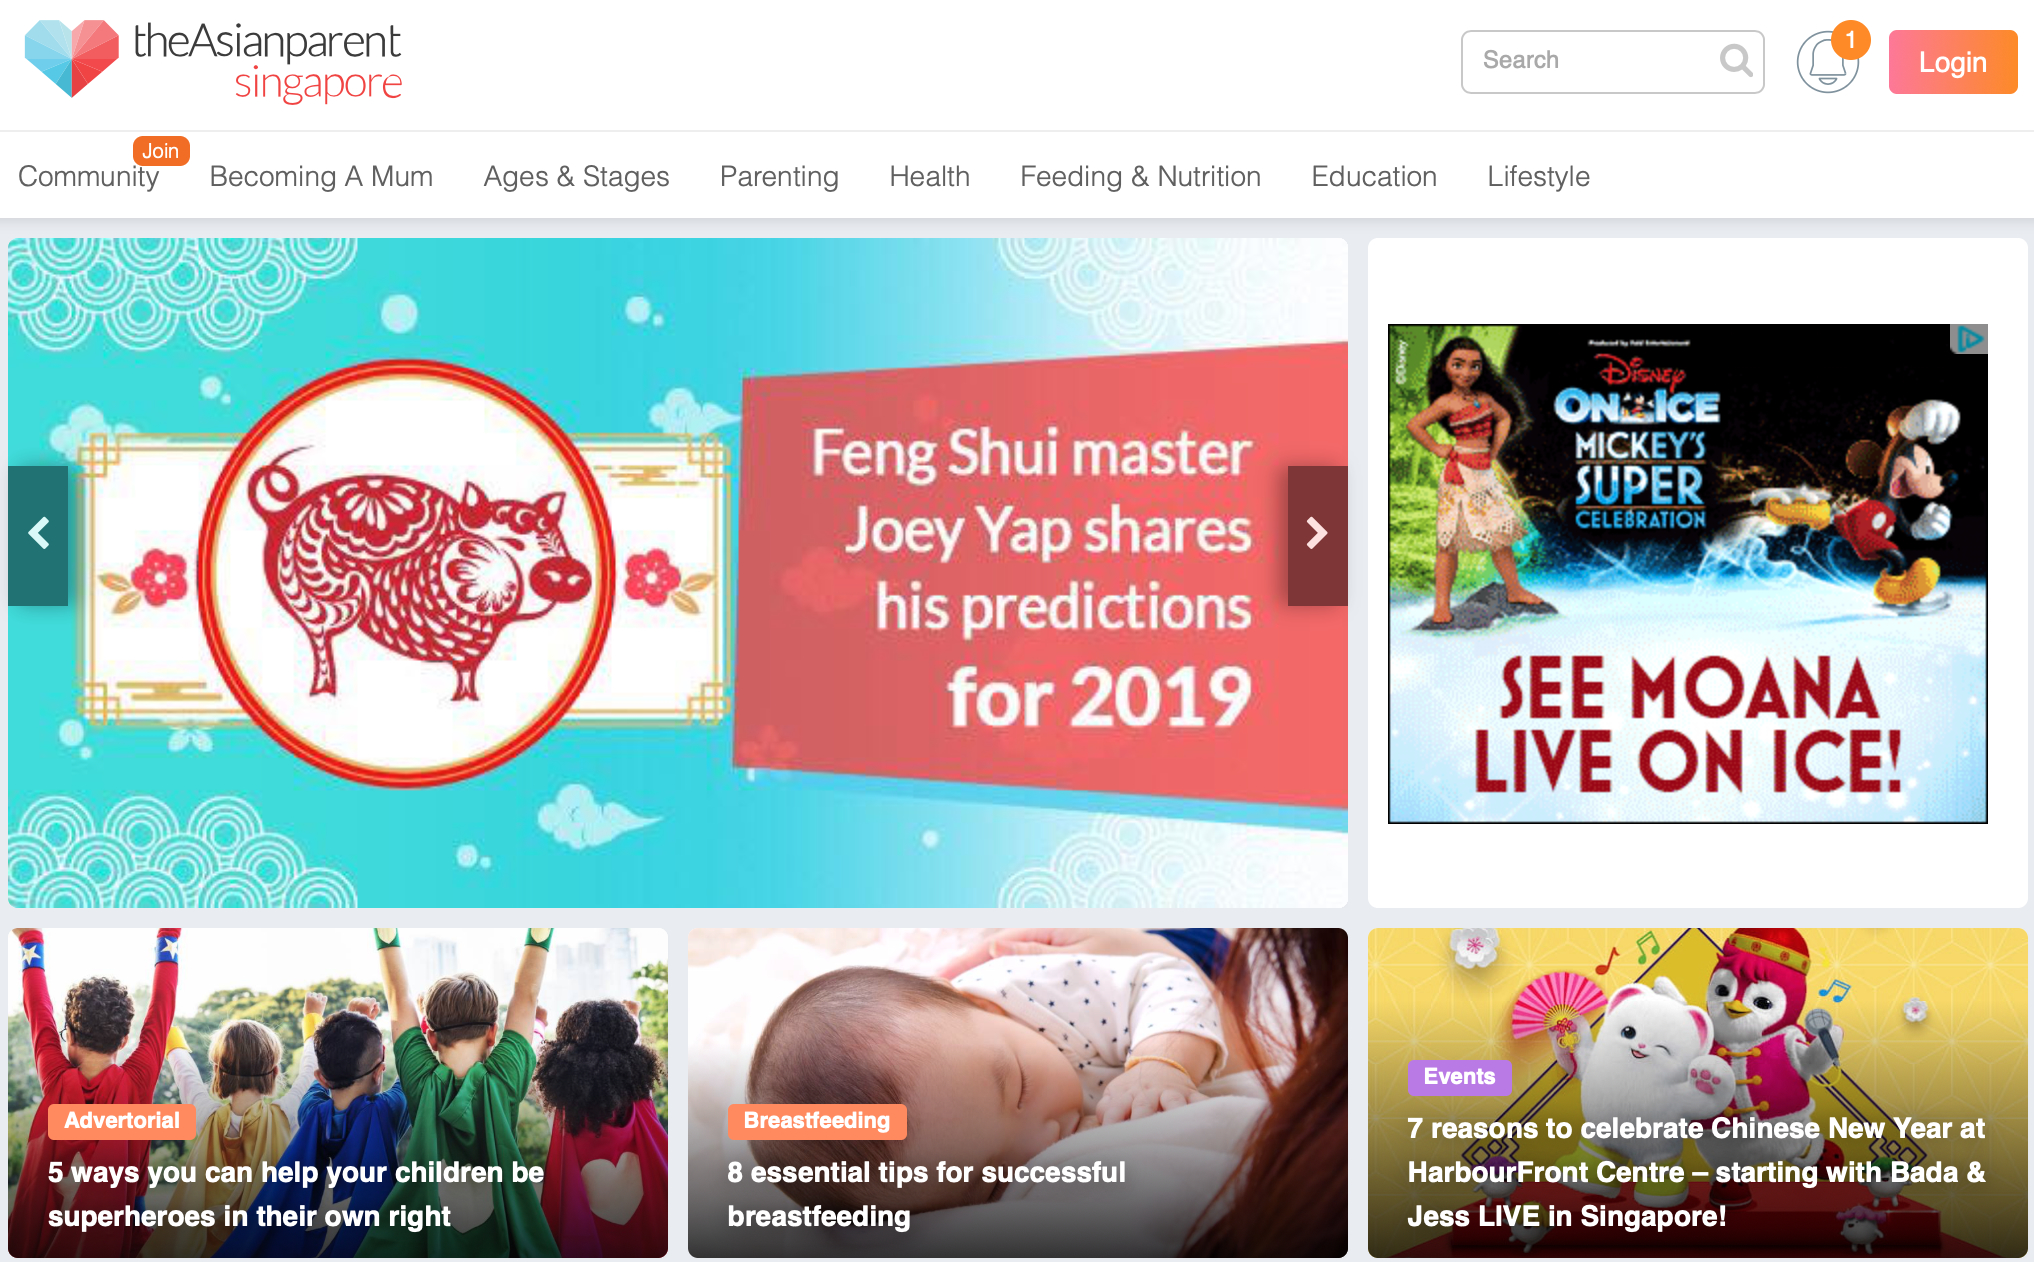 Exclusive|Singaporean online parenting startup theAsianparent to raise new round led by Fosun (update)